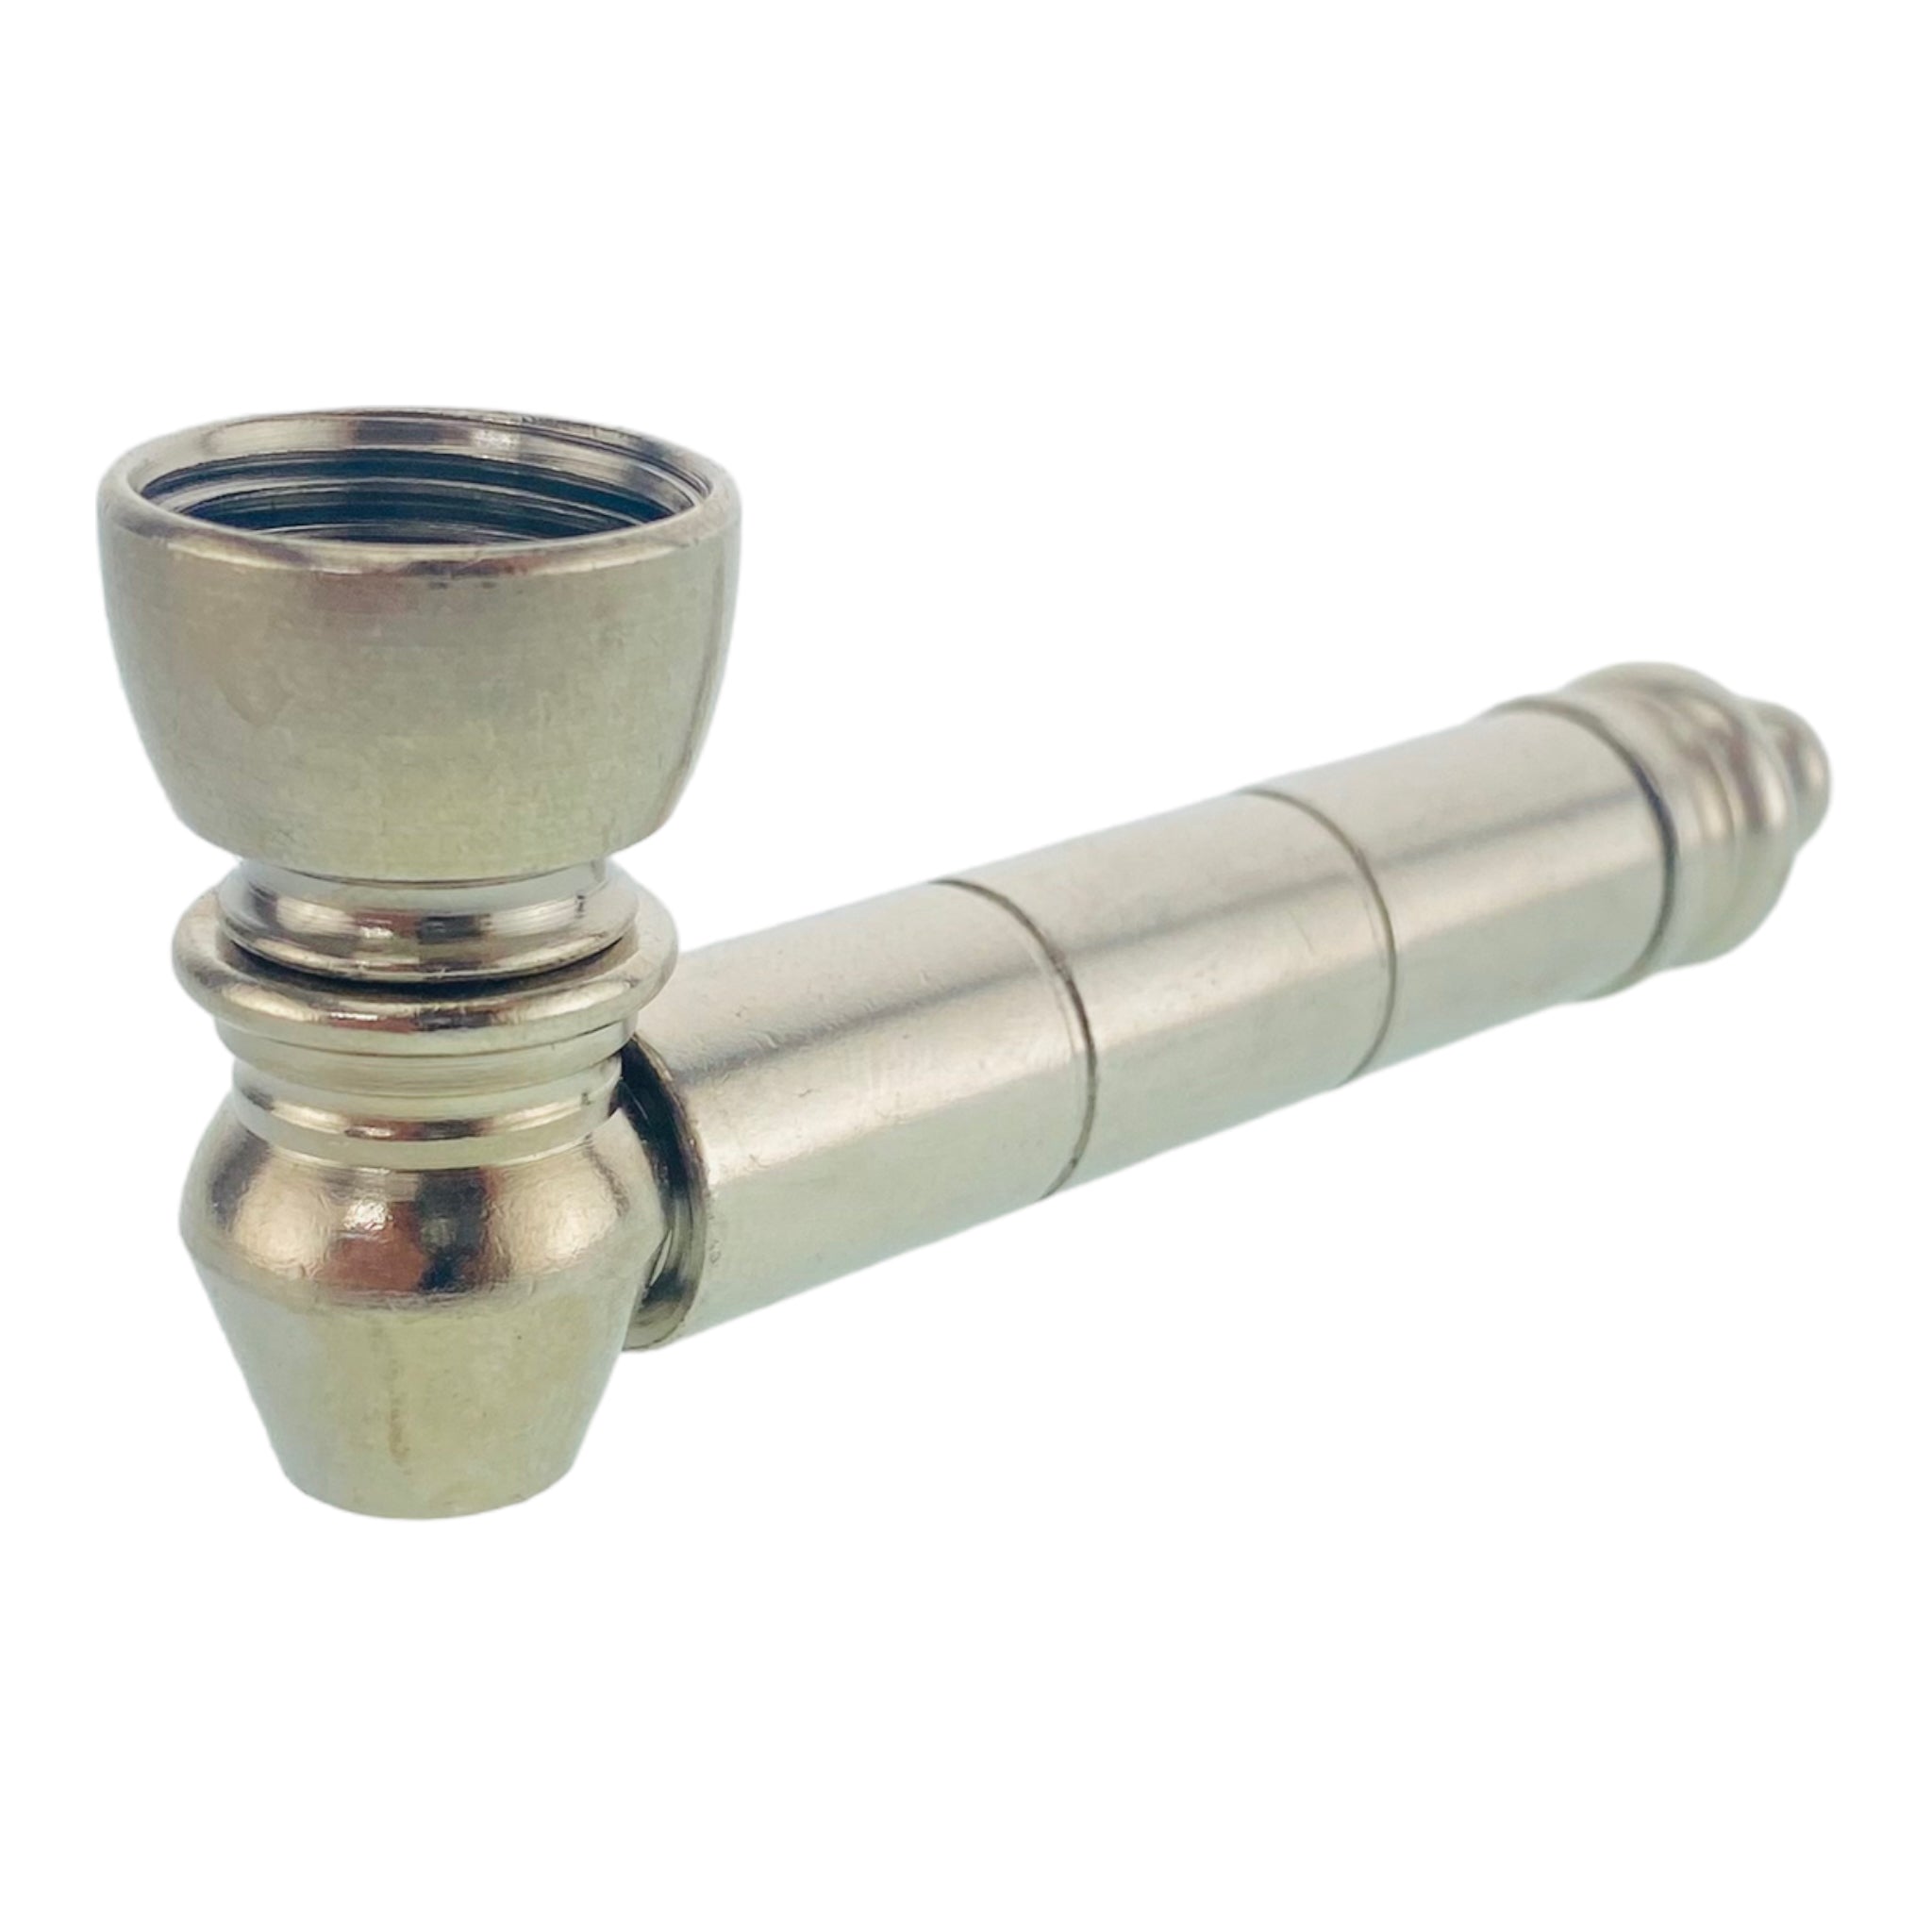 Metal Hand Pipes - Silver Basic Aluminum And Brass Metal Pipe With Small Chamber